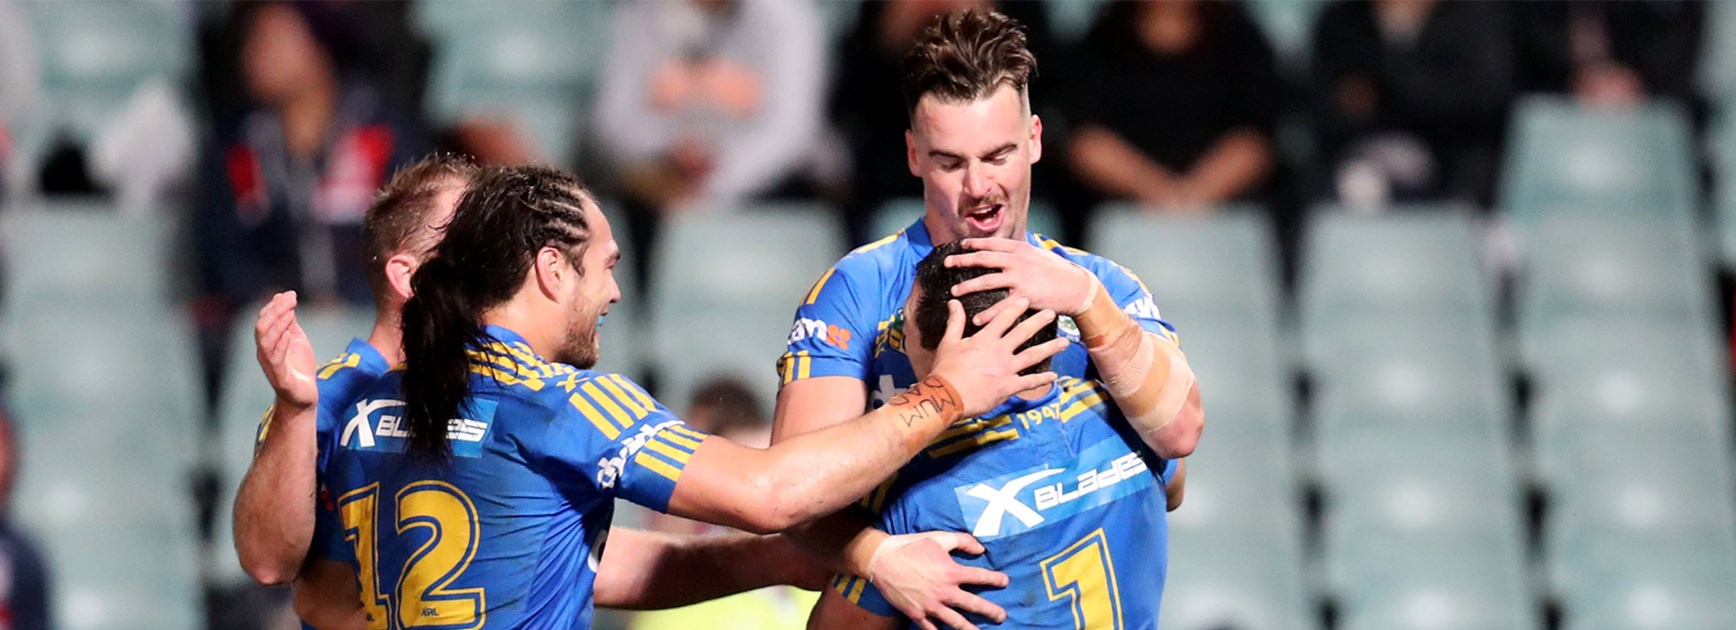 The Eels celebrate Michael Gordon's early try against the Roosters last week.